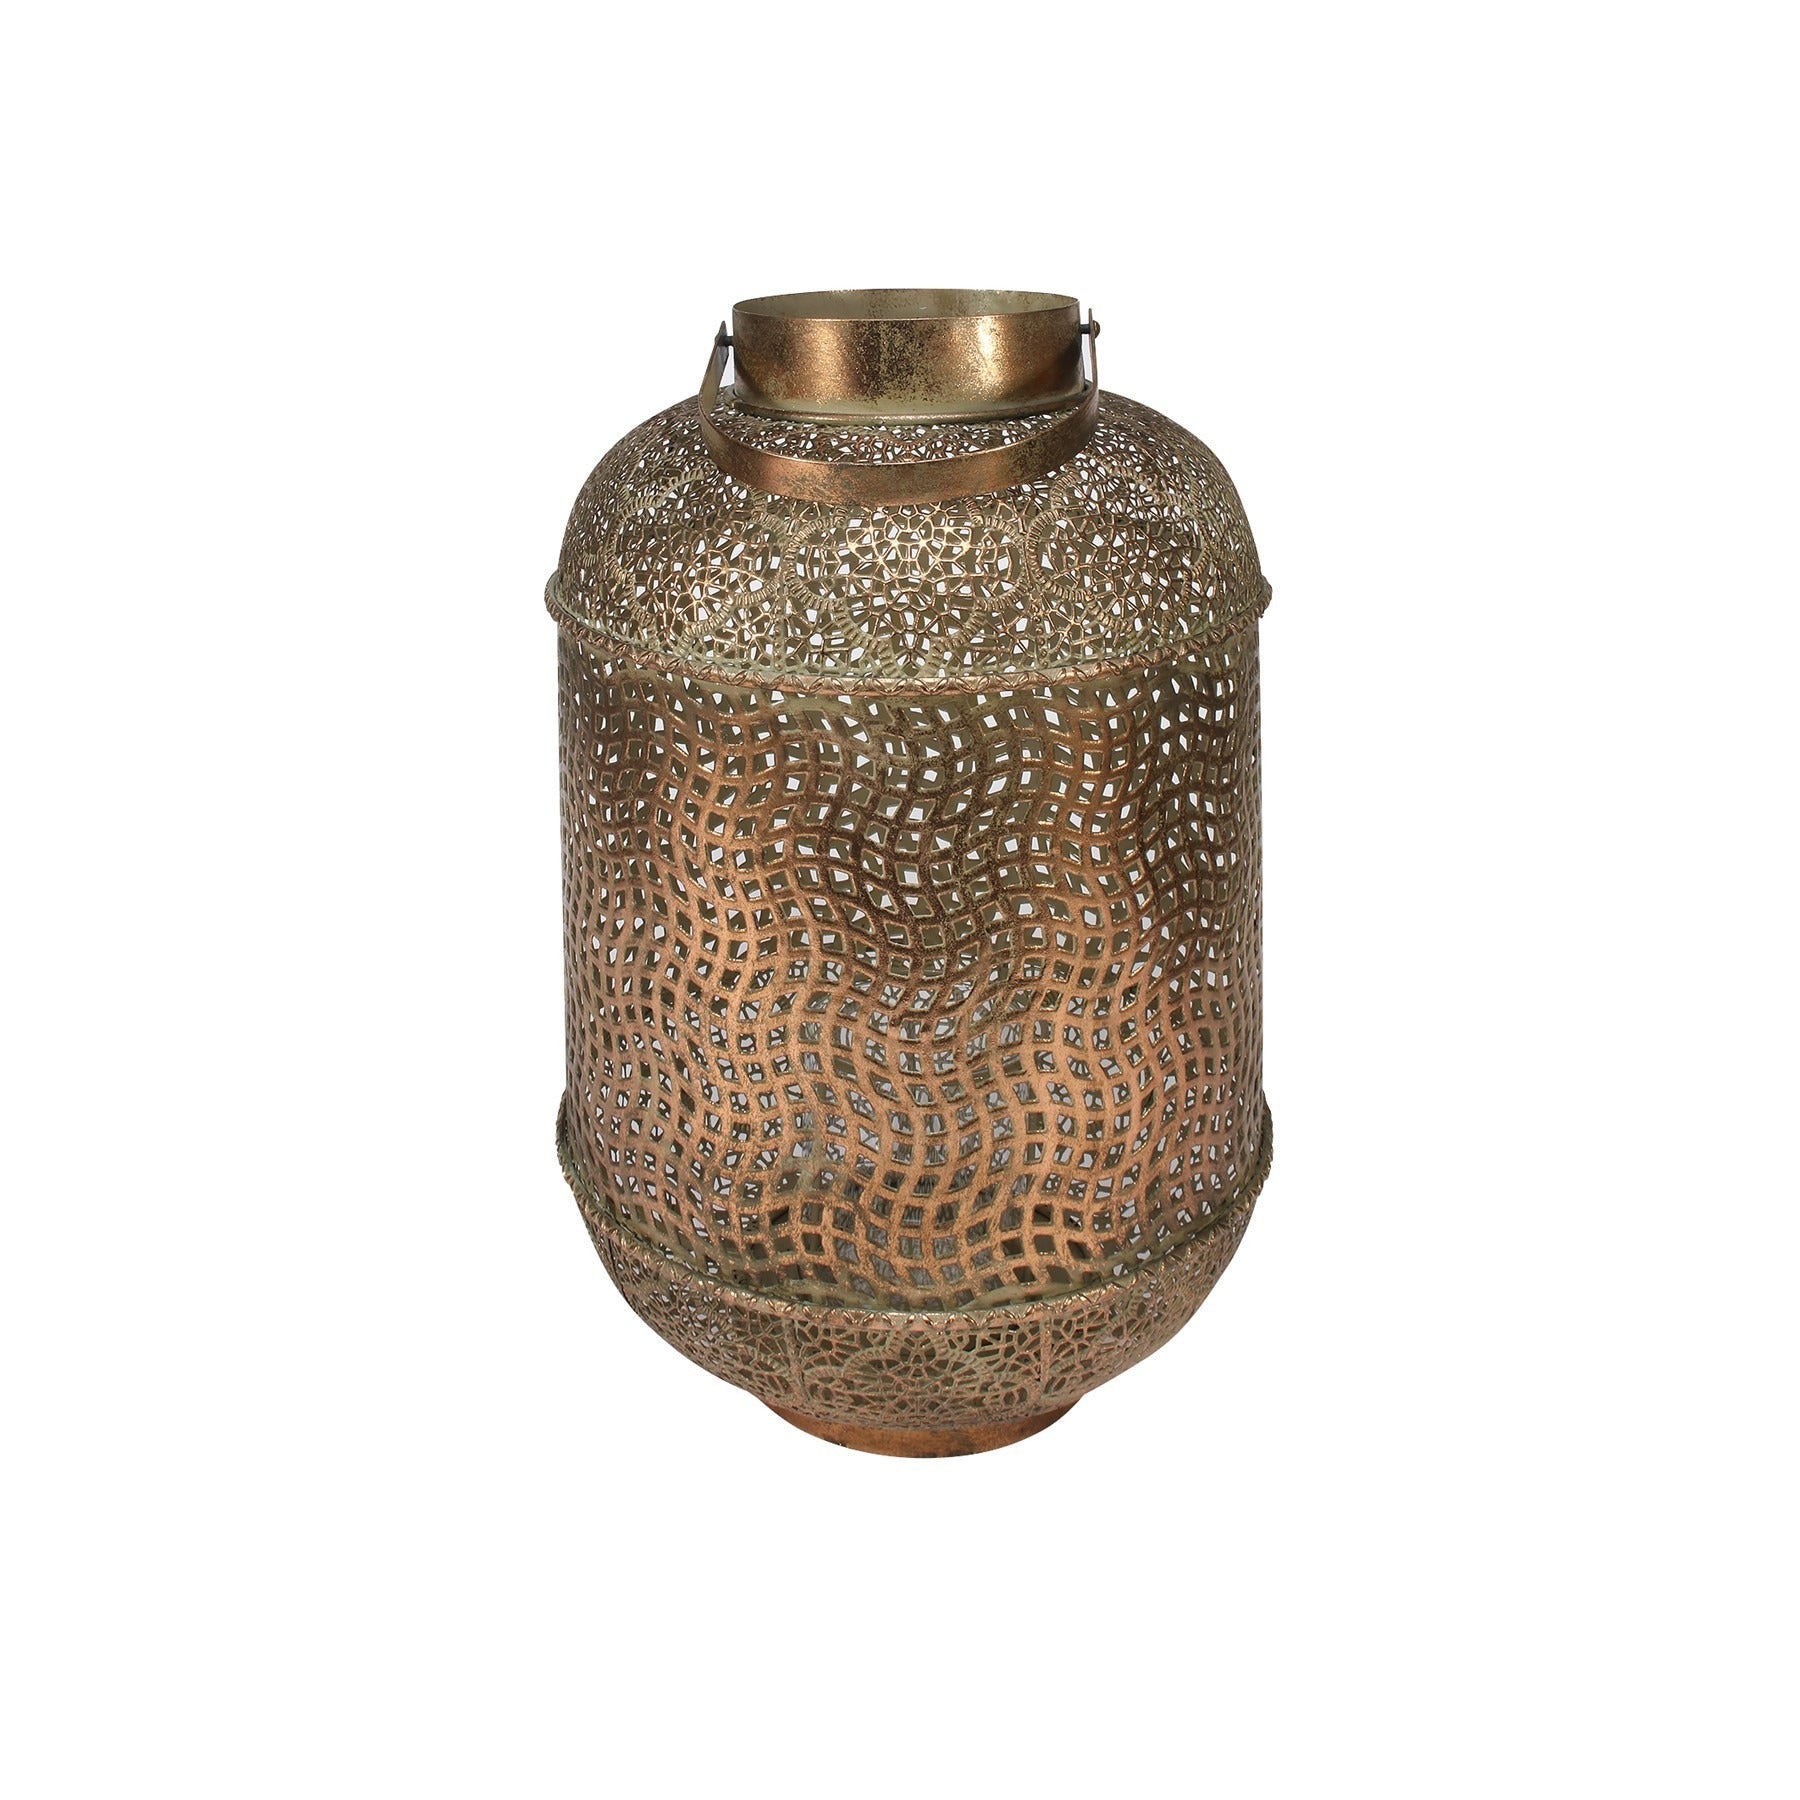 View Marrakech Nomad Lantern Small information